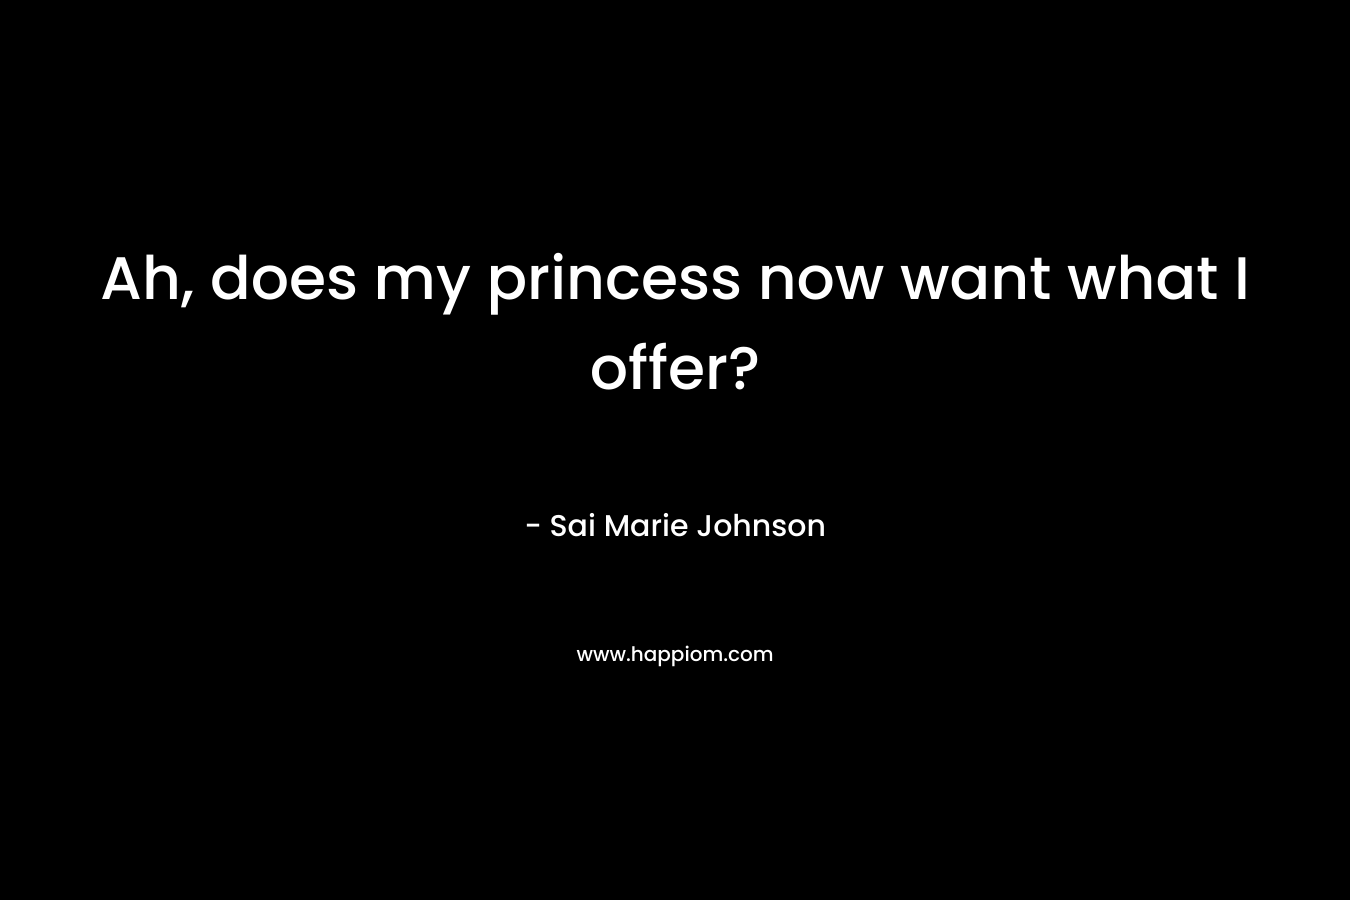 Ah, does my princess now want what I offer? – Sai Marie Johnson